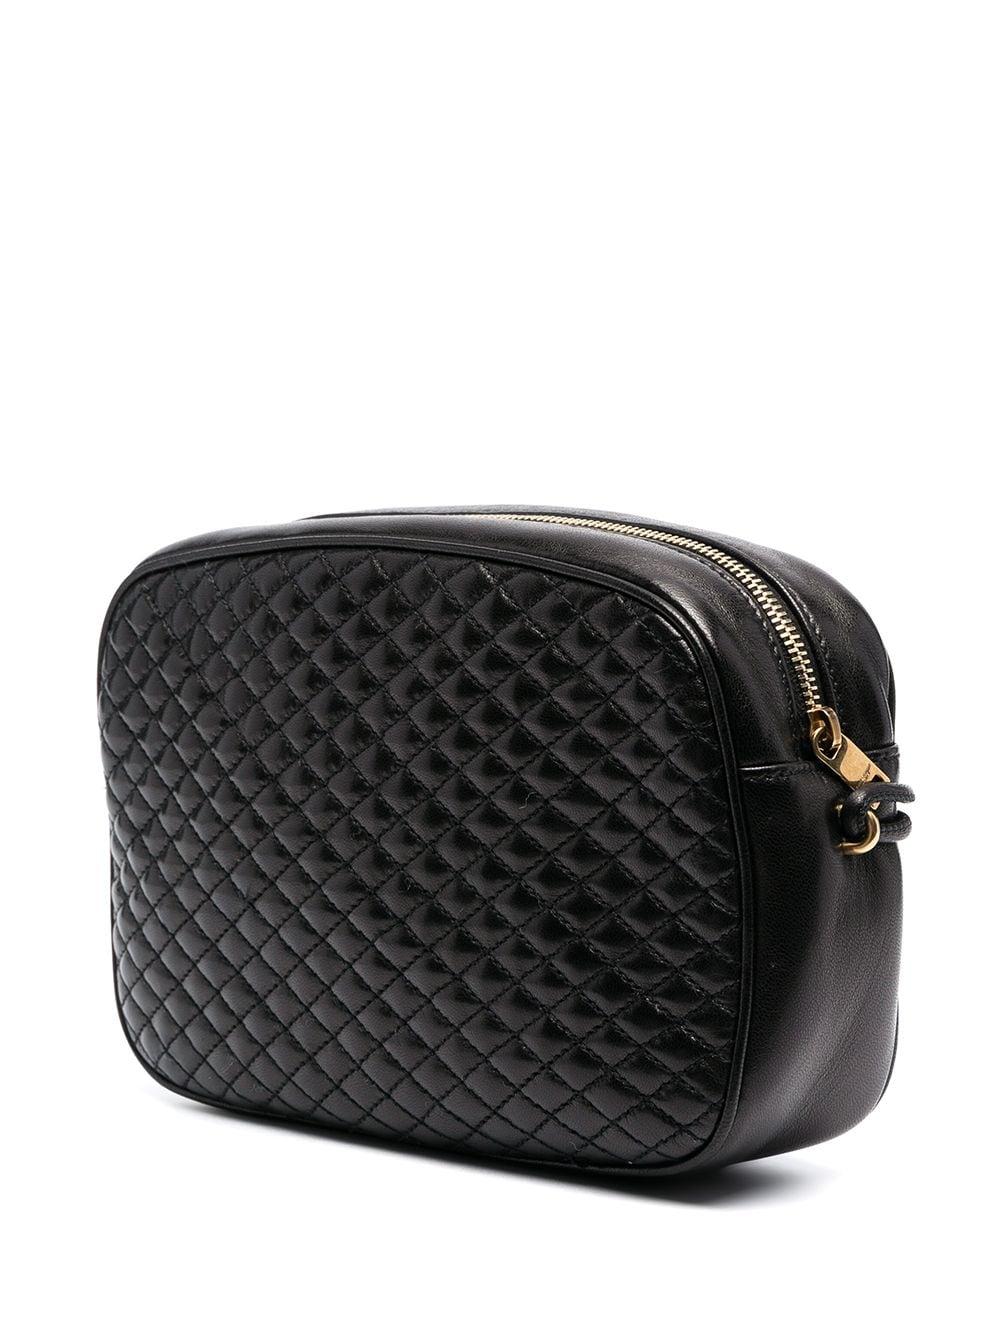 Saint Laurent Victoire Camera Bag In Quilted Leather in Black 